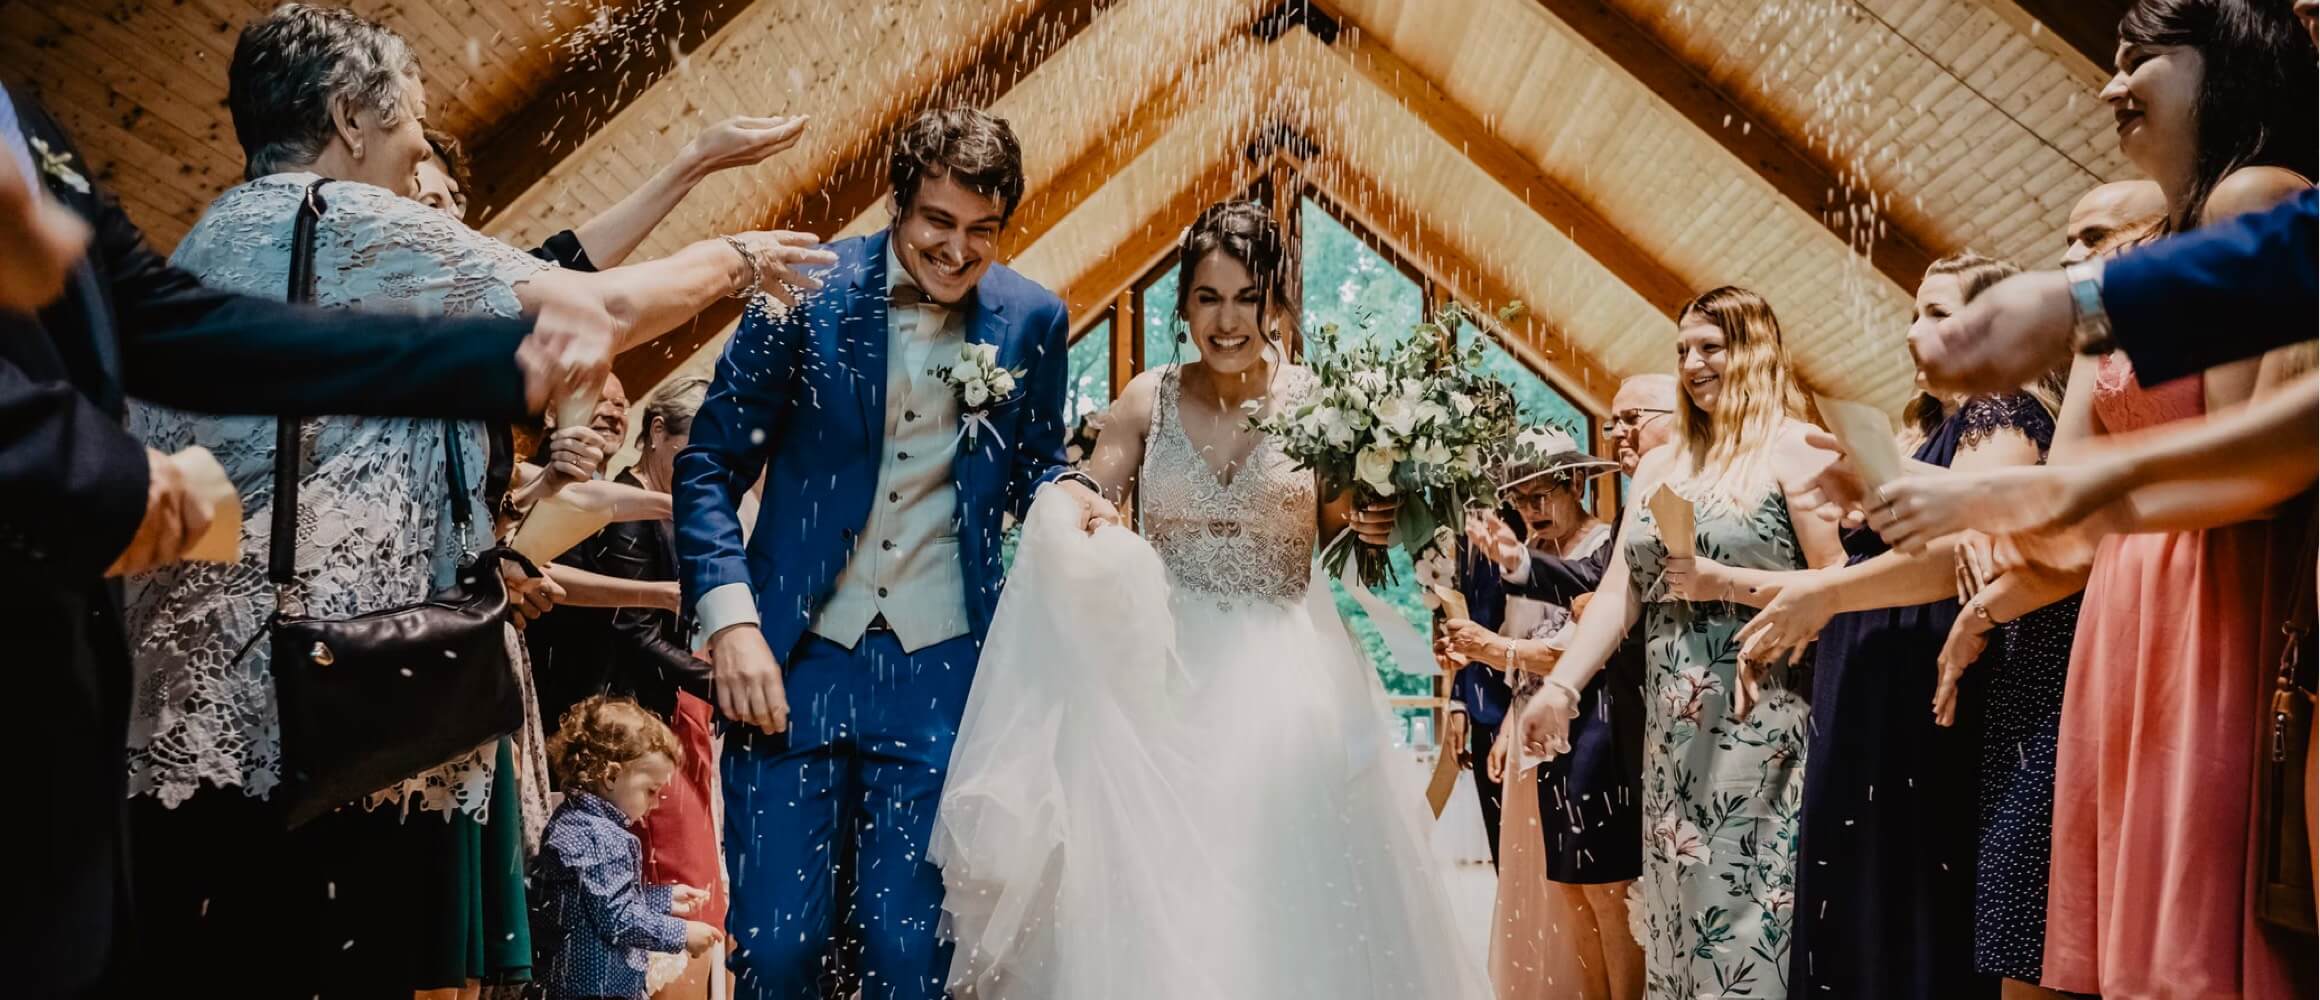 A couple being showered with confetti